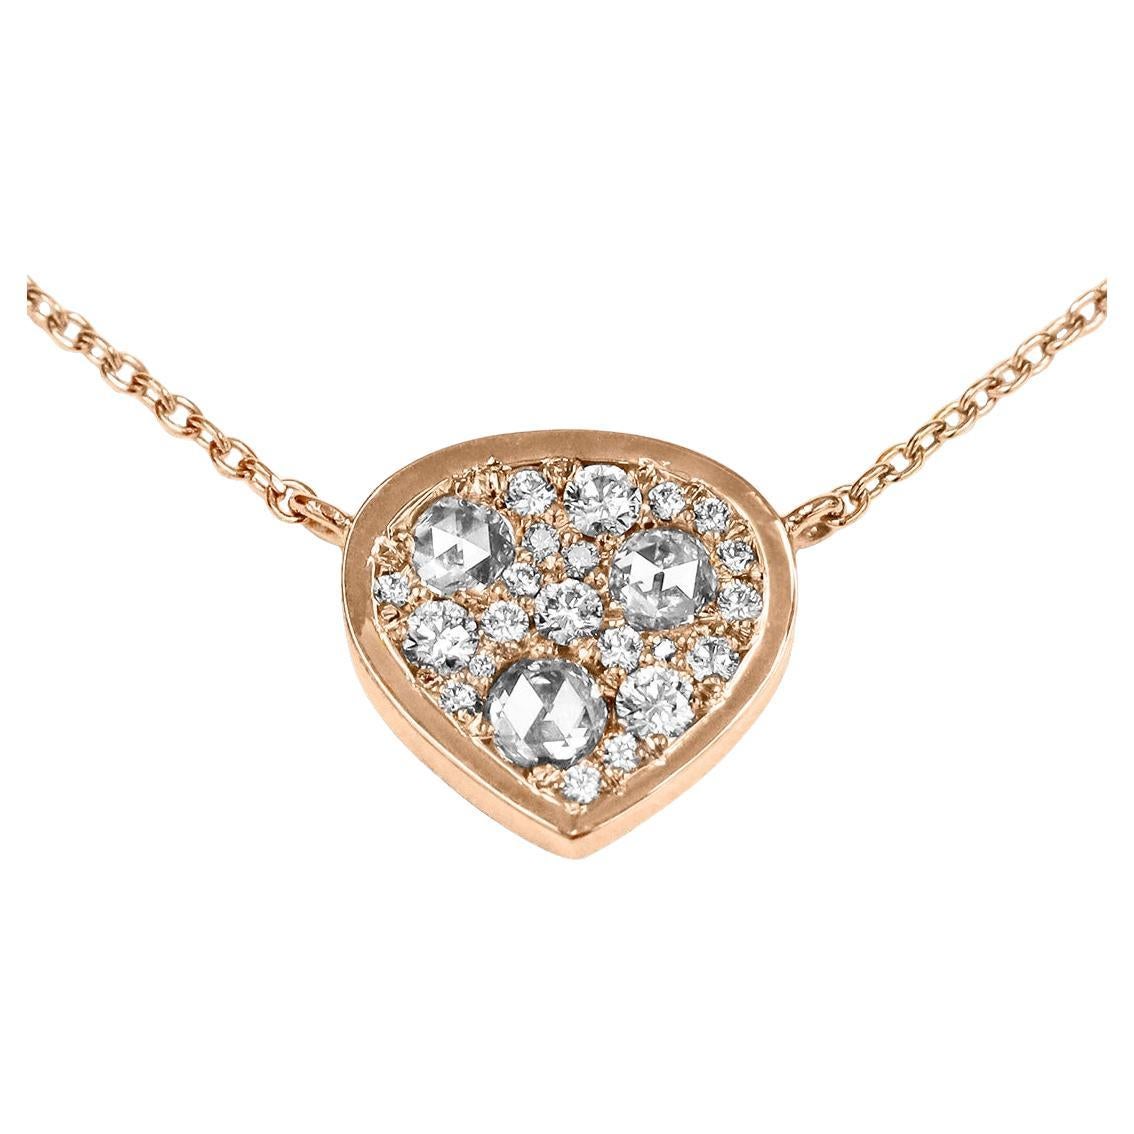 Rose Gold 0.51 ct. White Brilliant- and Rose-Cut Diamond Pave Pendant Necklace